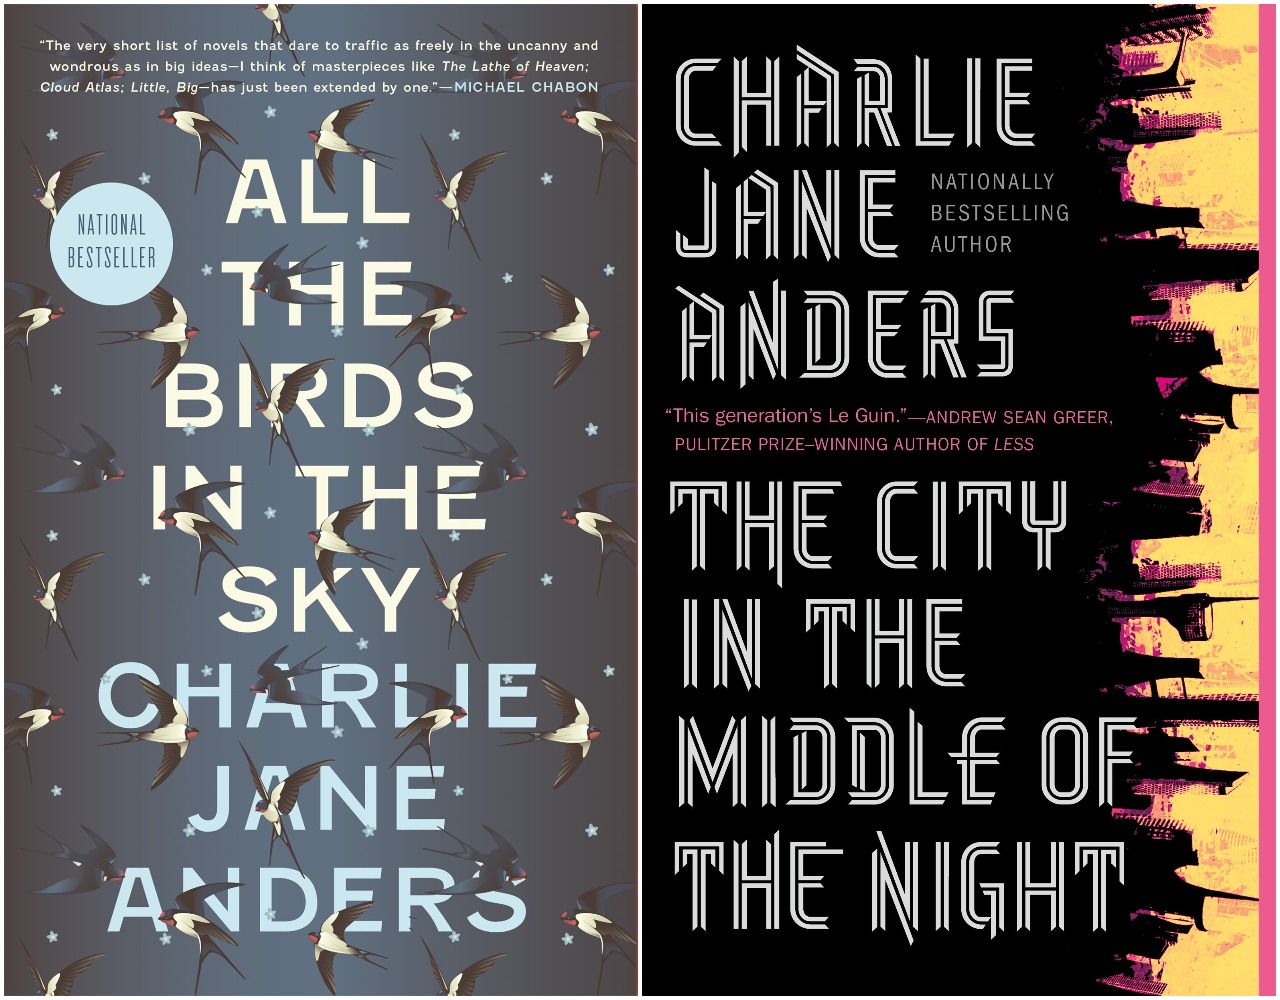 The covers for Charlie Jane Anders' previous novels, All the Birds in the Sky, and The City in the Middle of the Night.